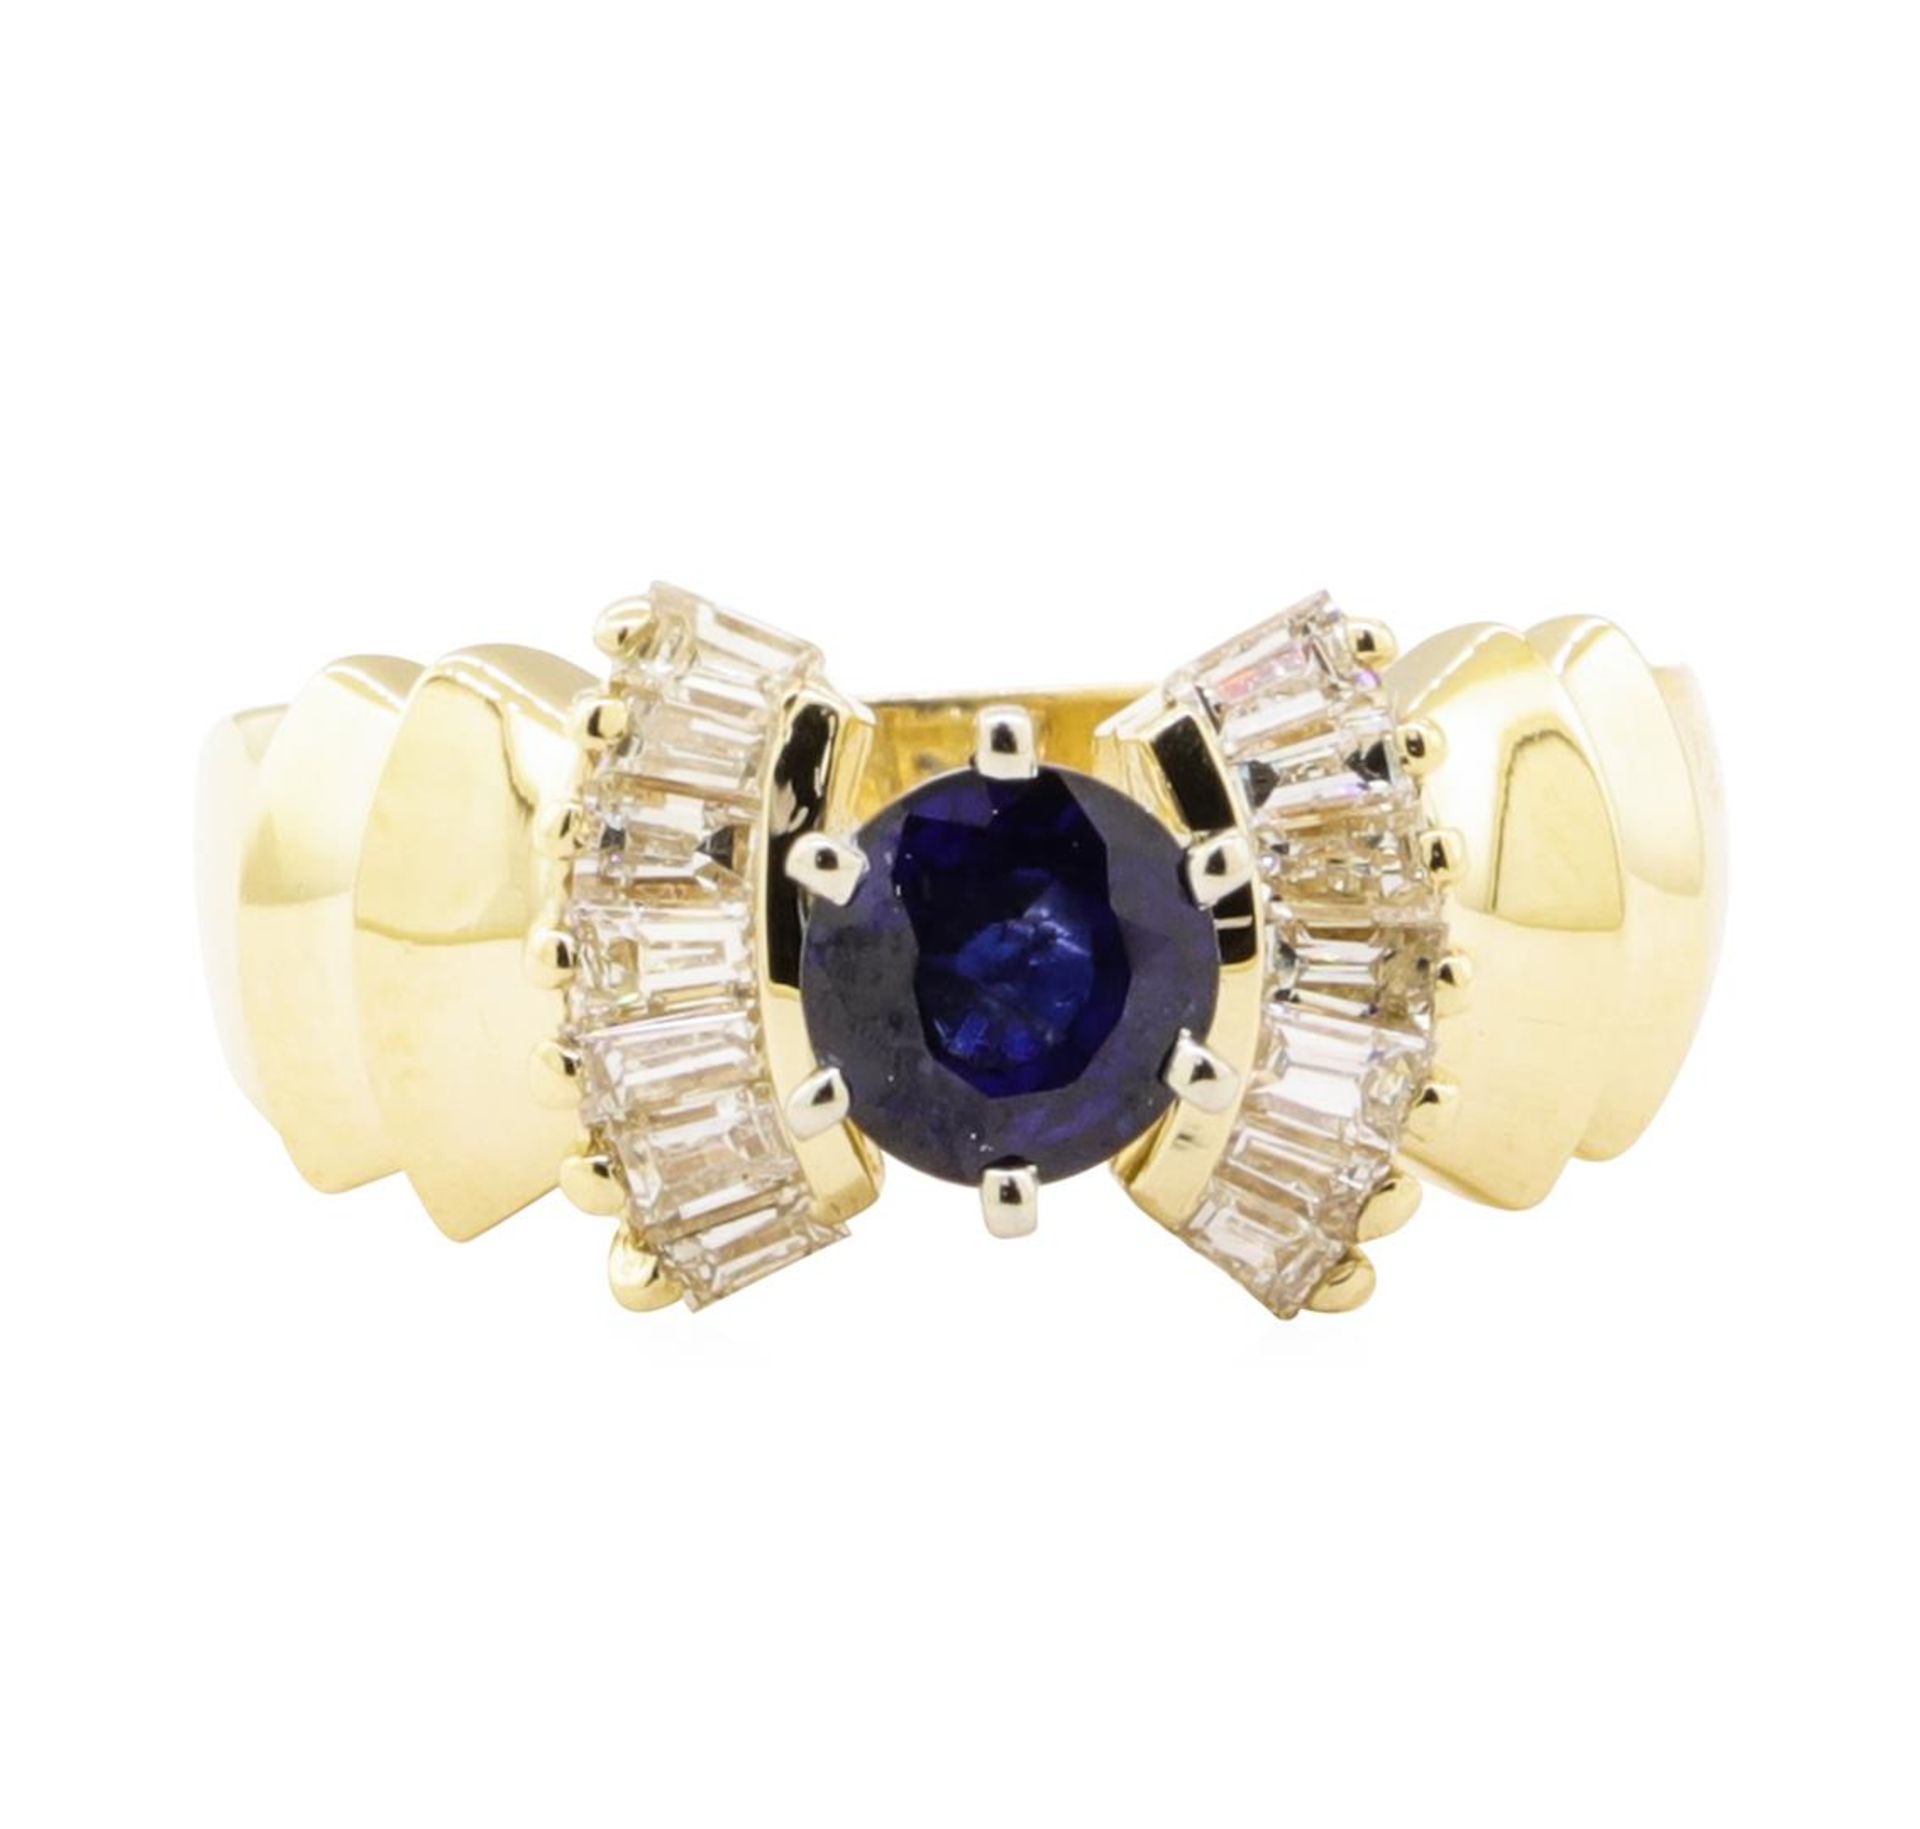 1.47 ctw Blue Sapphire And Diamond Ring - 14KT Yellow Gold - Image 2 of 5